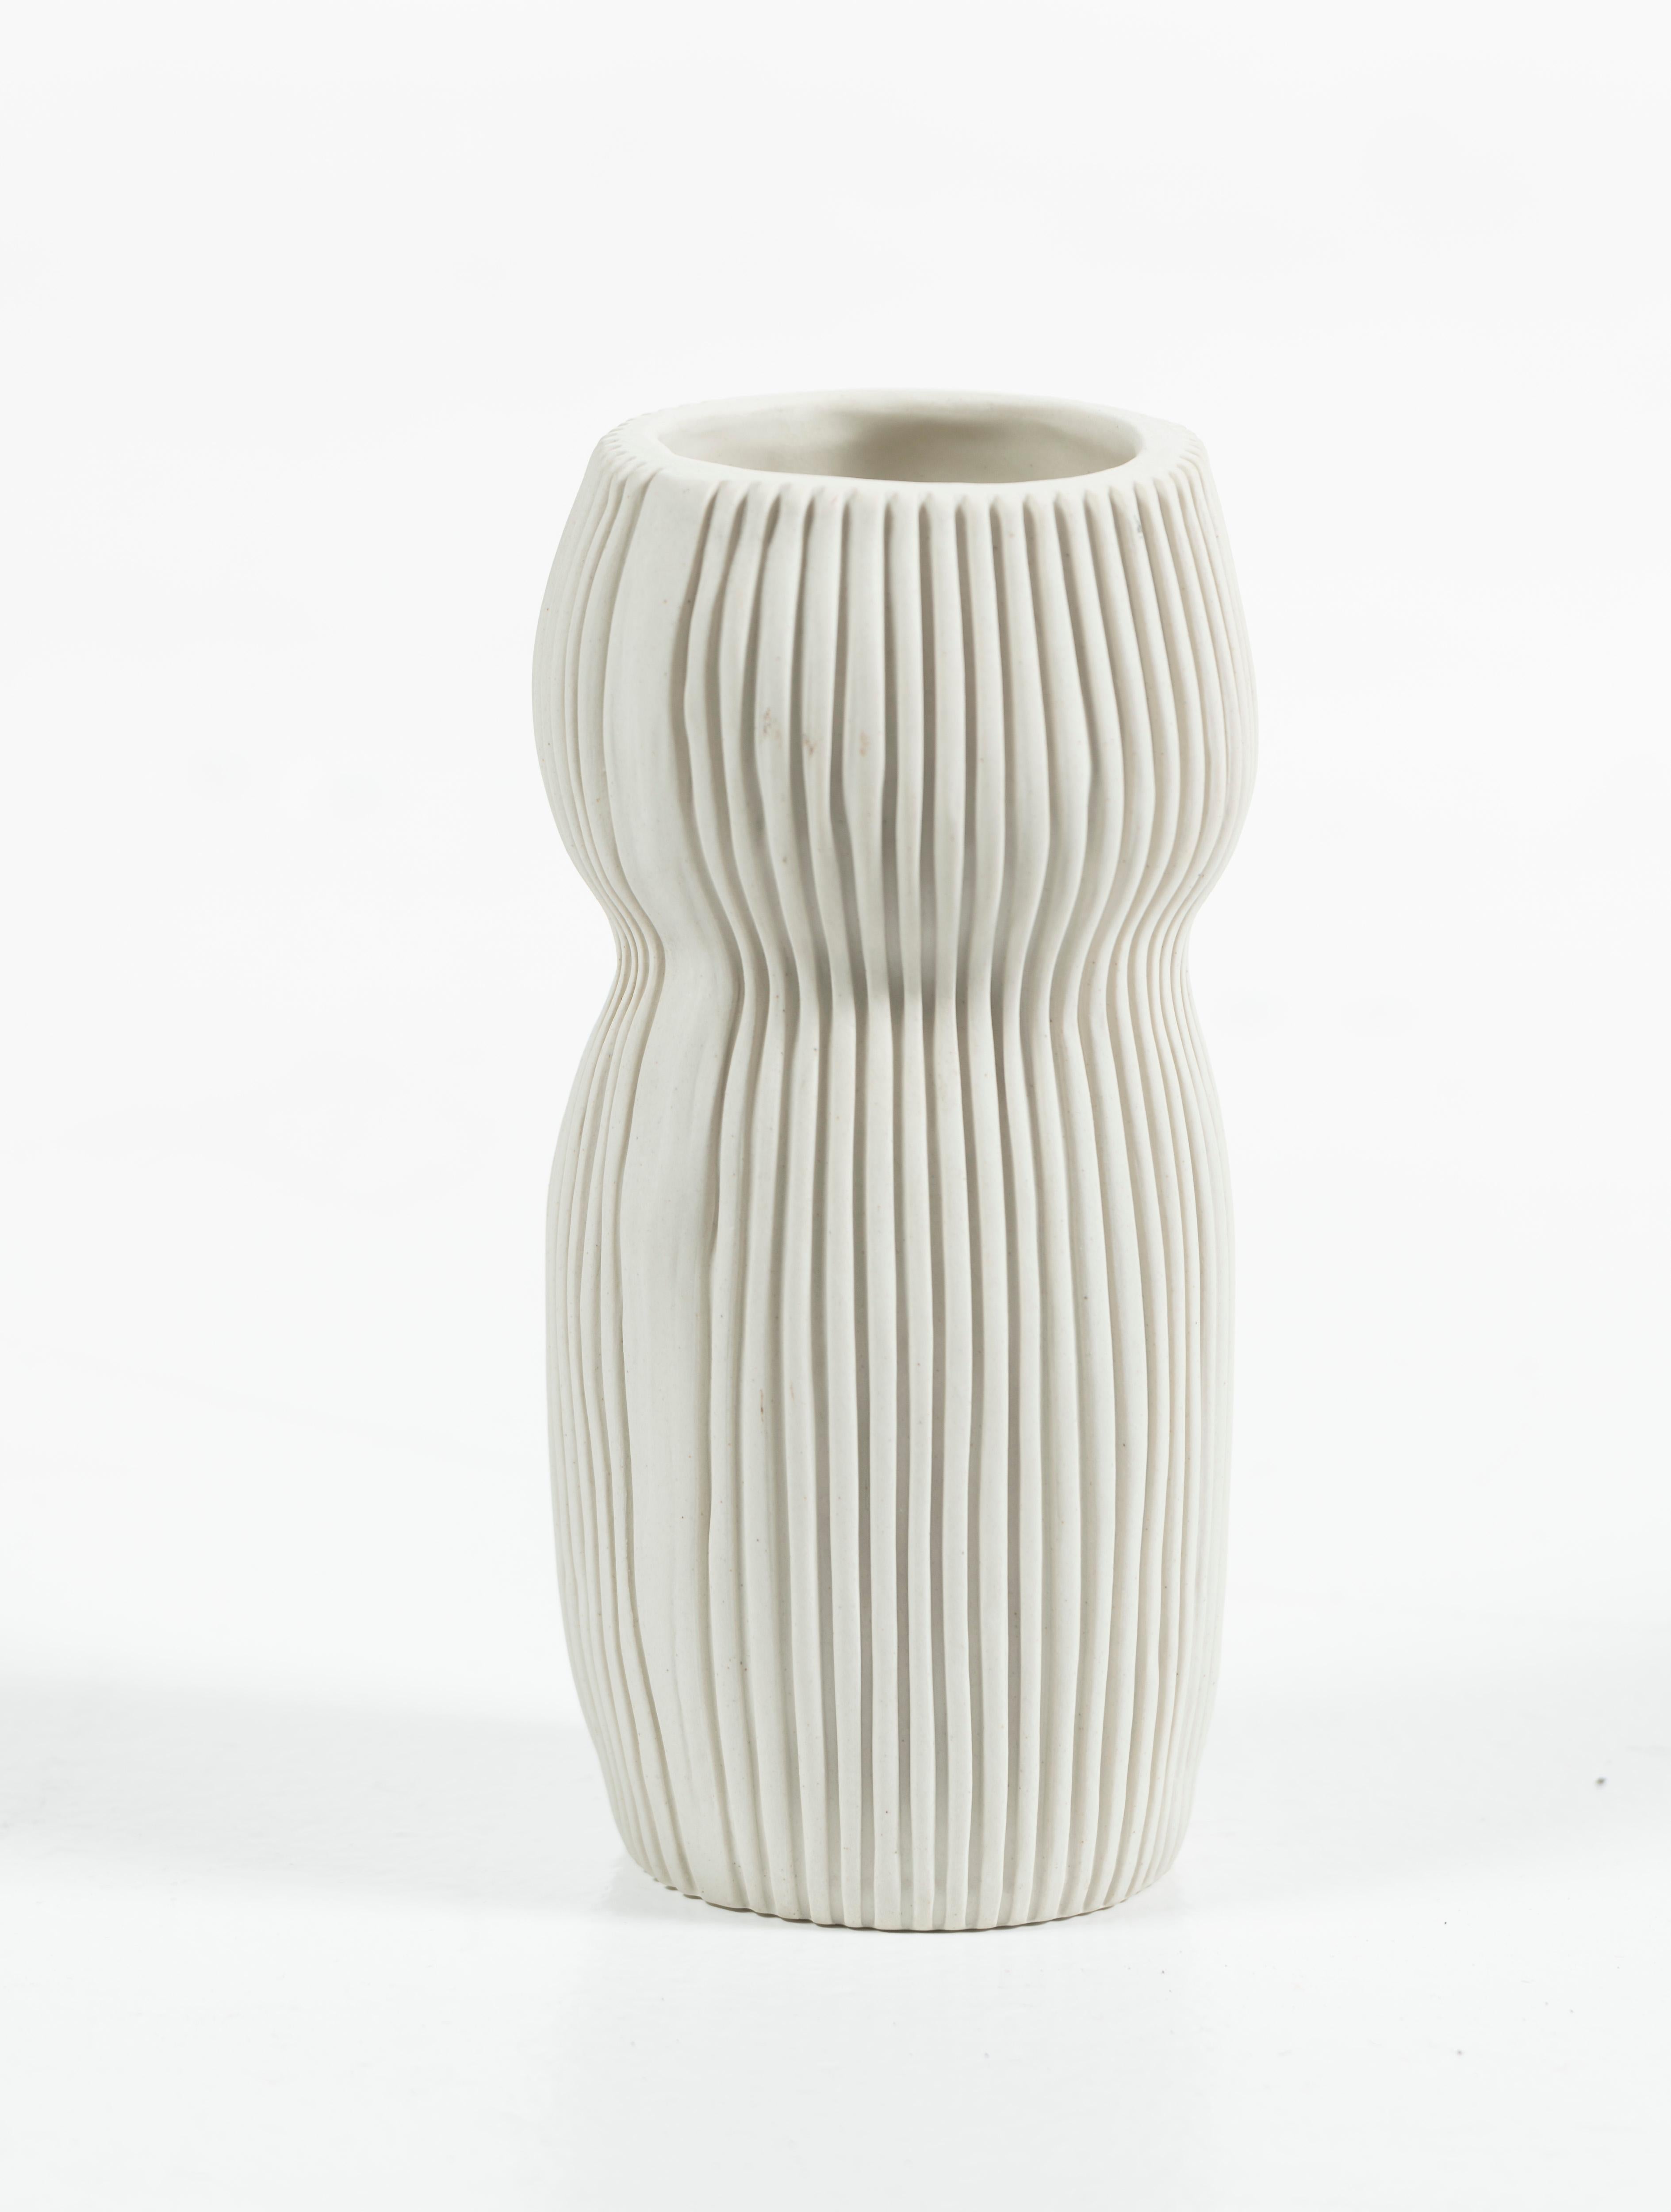 Hand-Crafted Hand Crafted Contemporary Ceramic Vase in Cream, signed For Sale